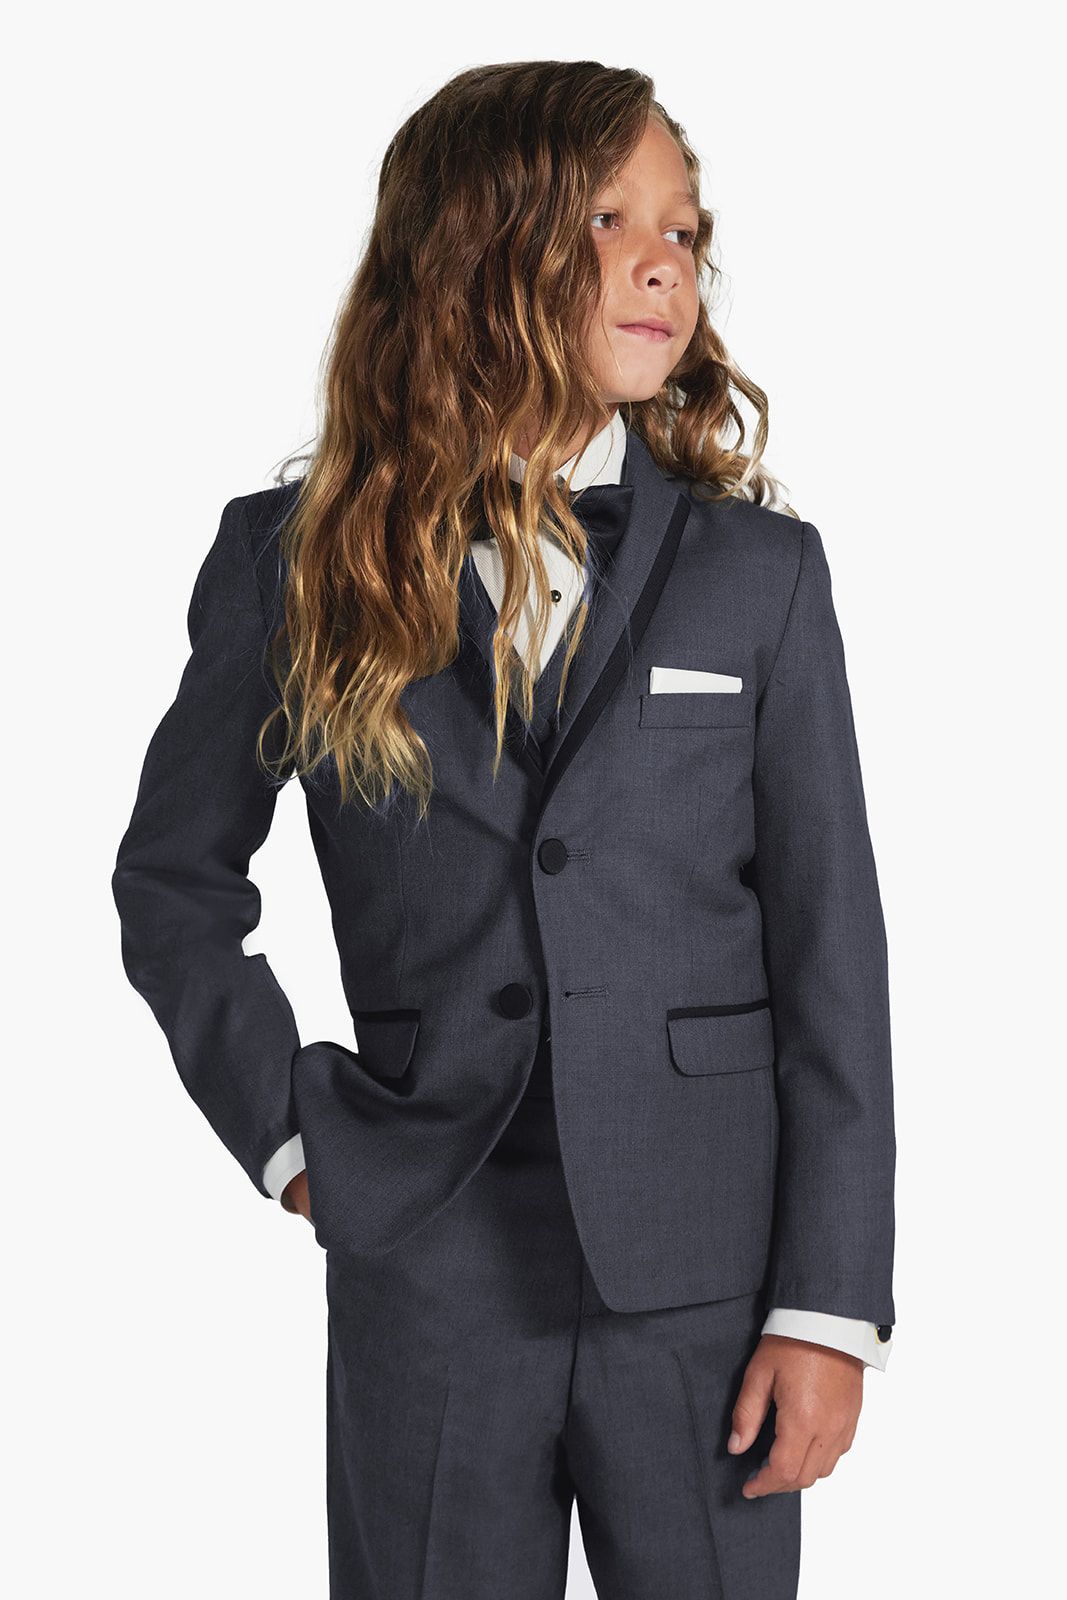 Charcoal Gray Notch Lapel Tuxedo for kids, boys, children, and teens